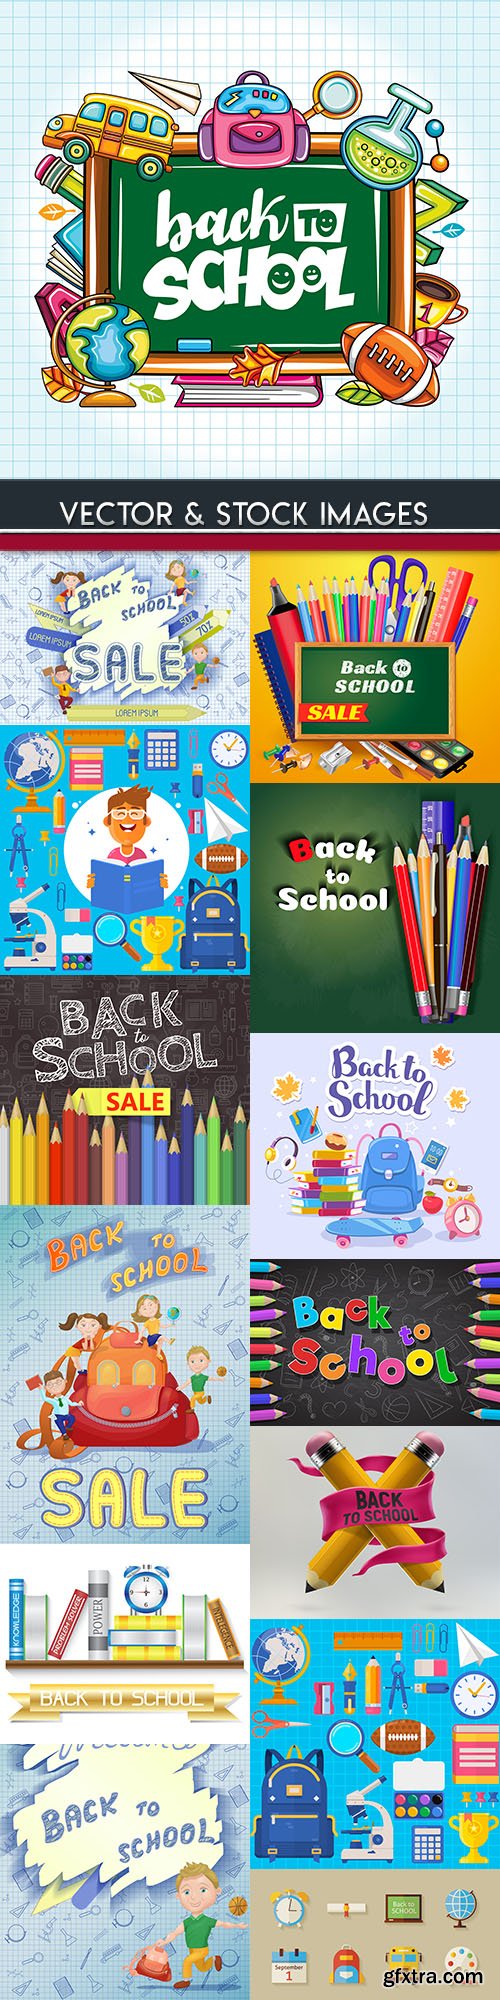 Back to school and accessories collection illustration 26 